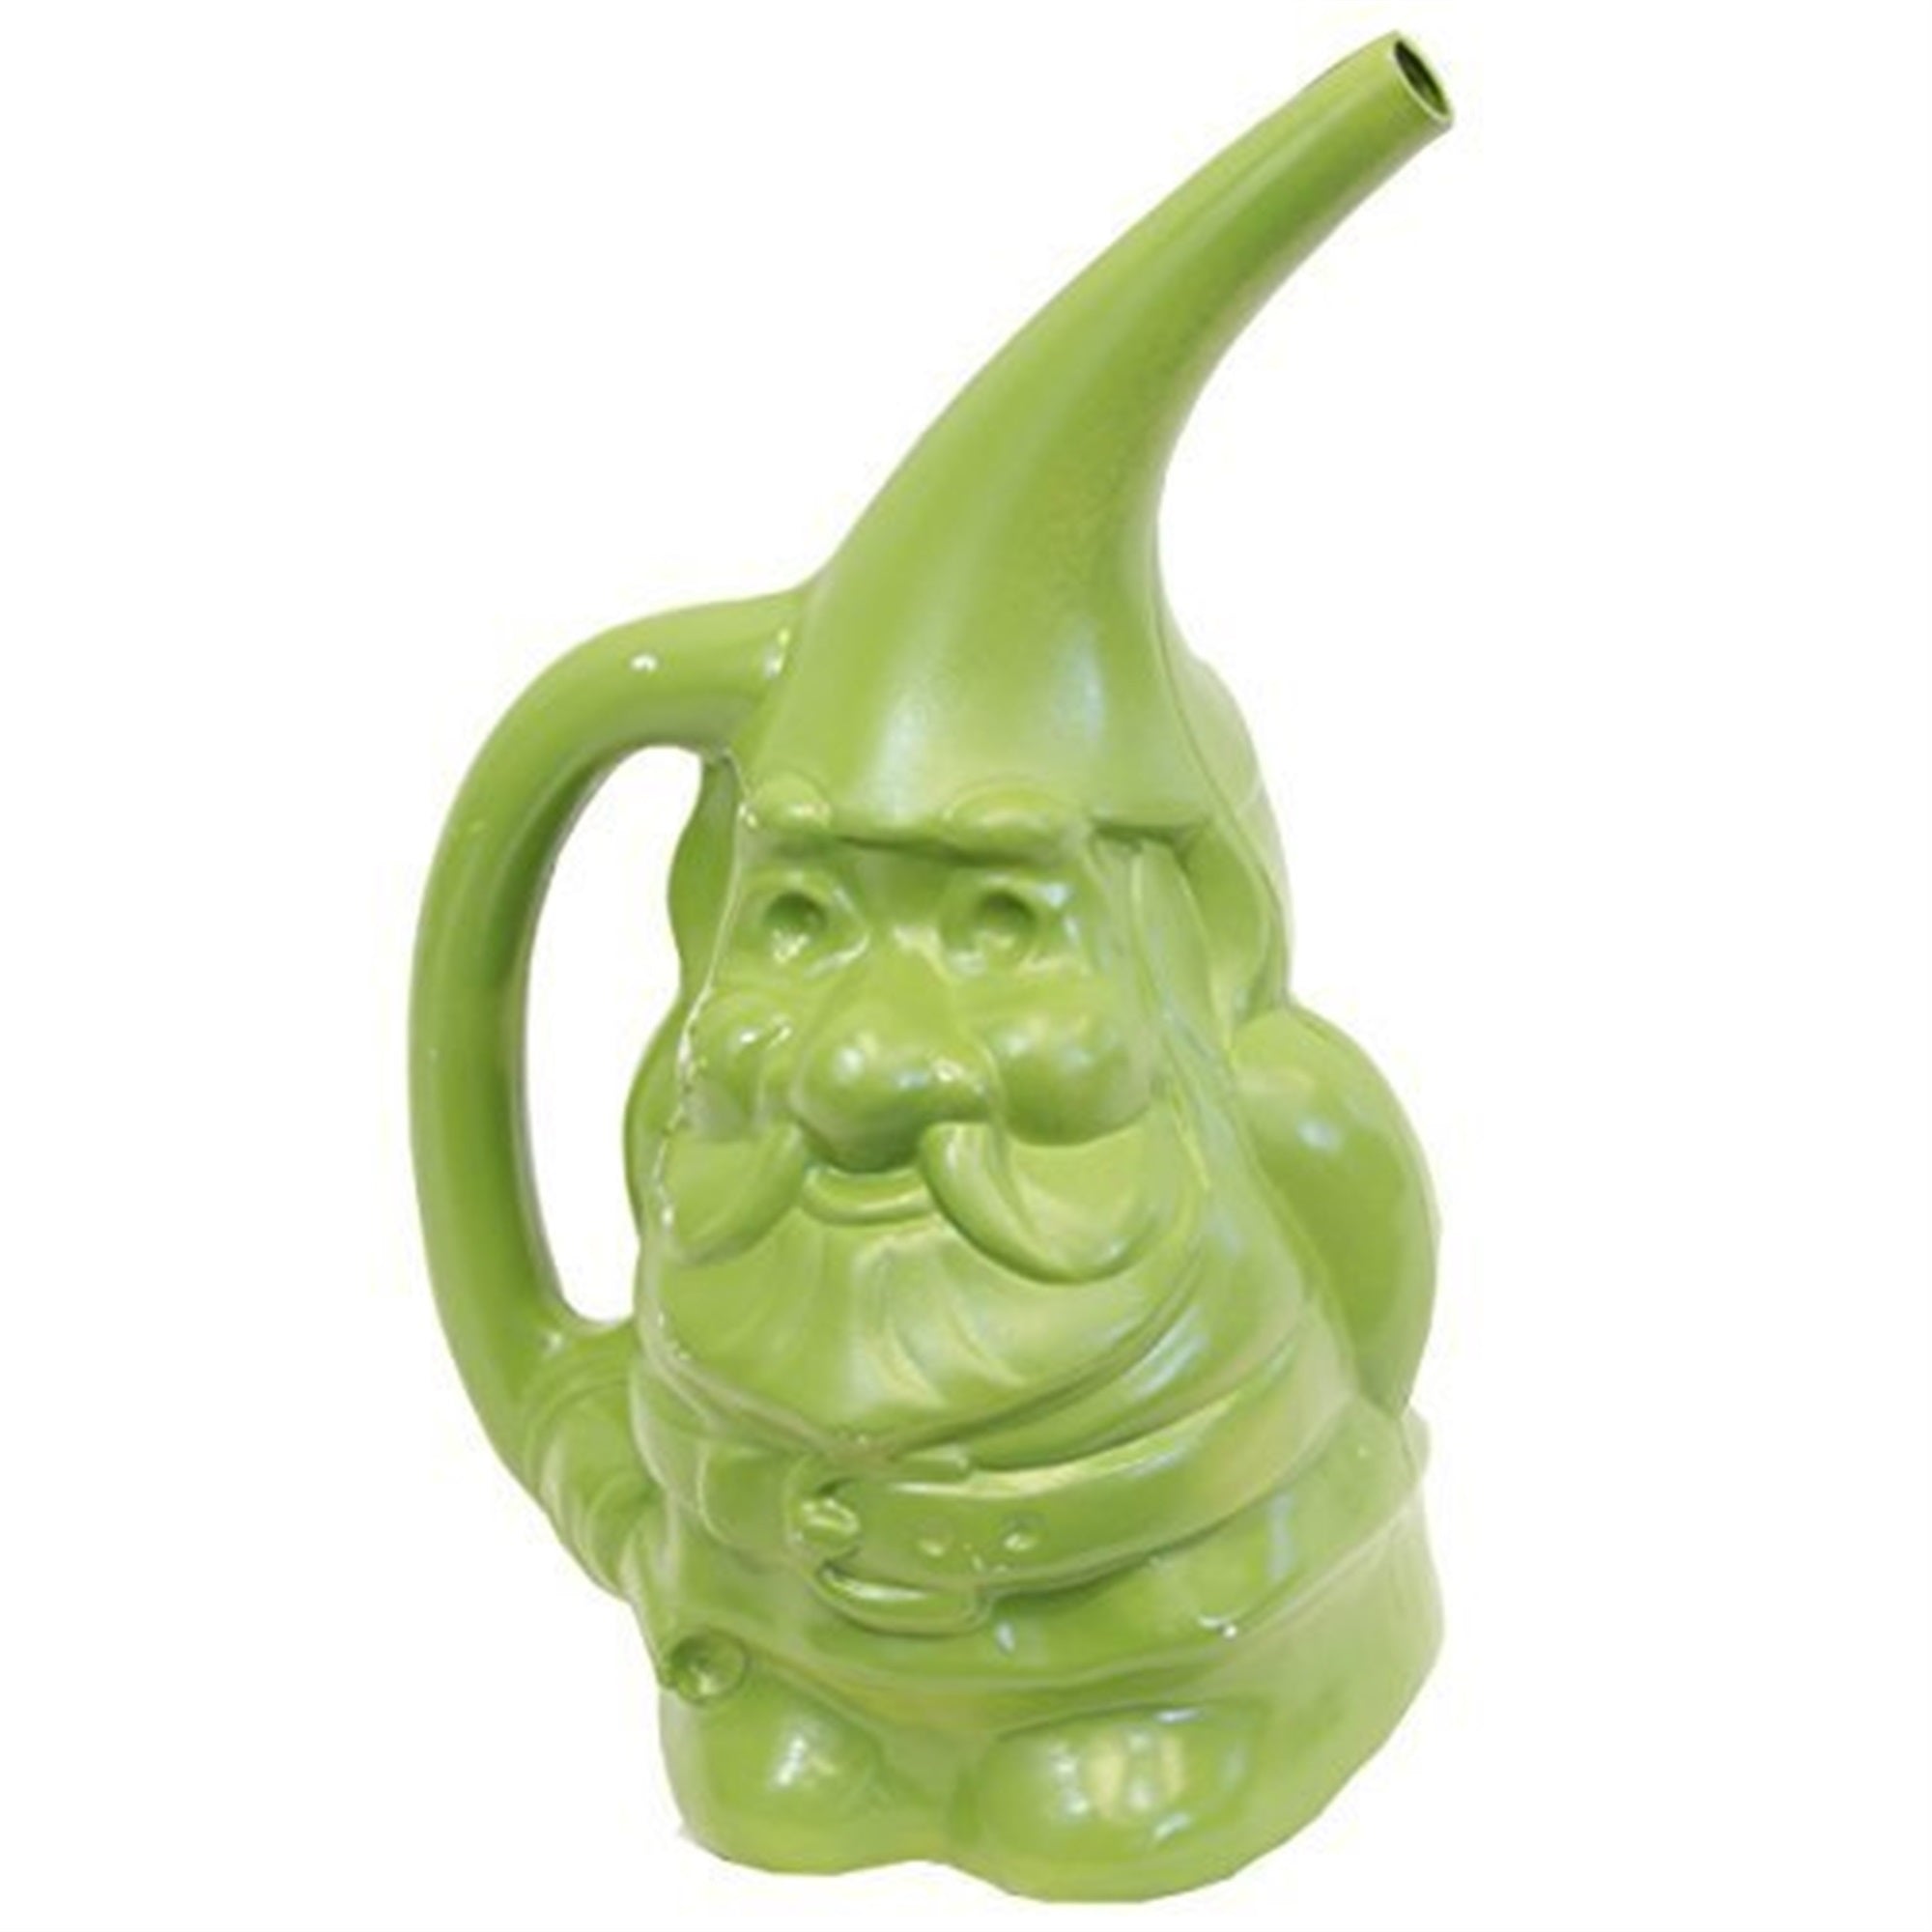 Novelty Gnute the Gnome Plastic Watering Can, Moss Green, 1.5 Gallon Capacity